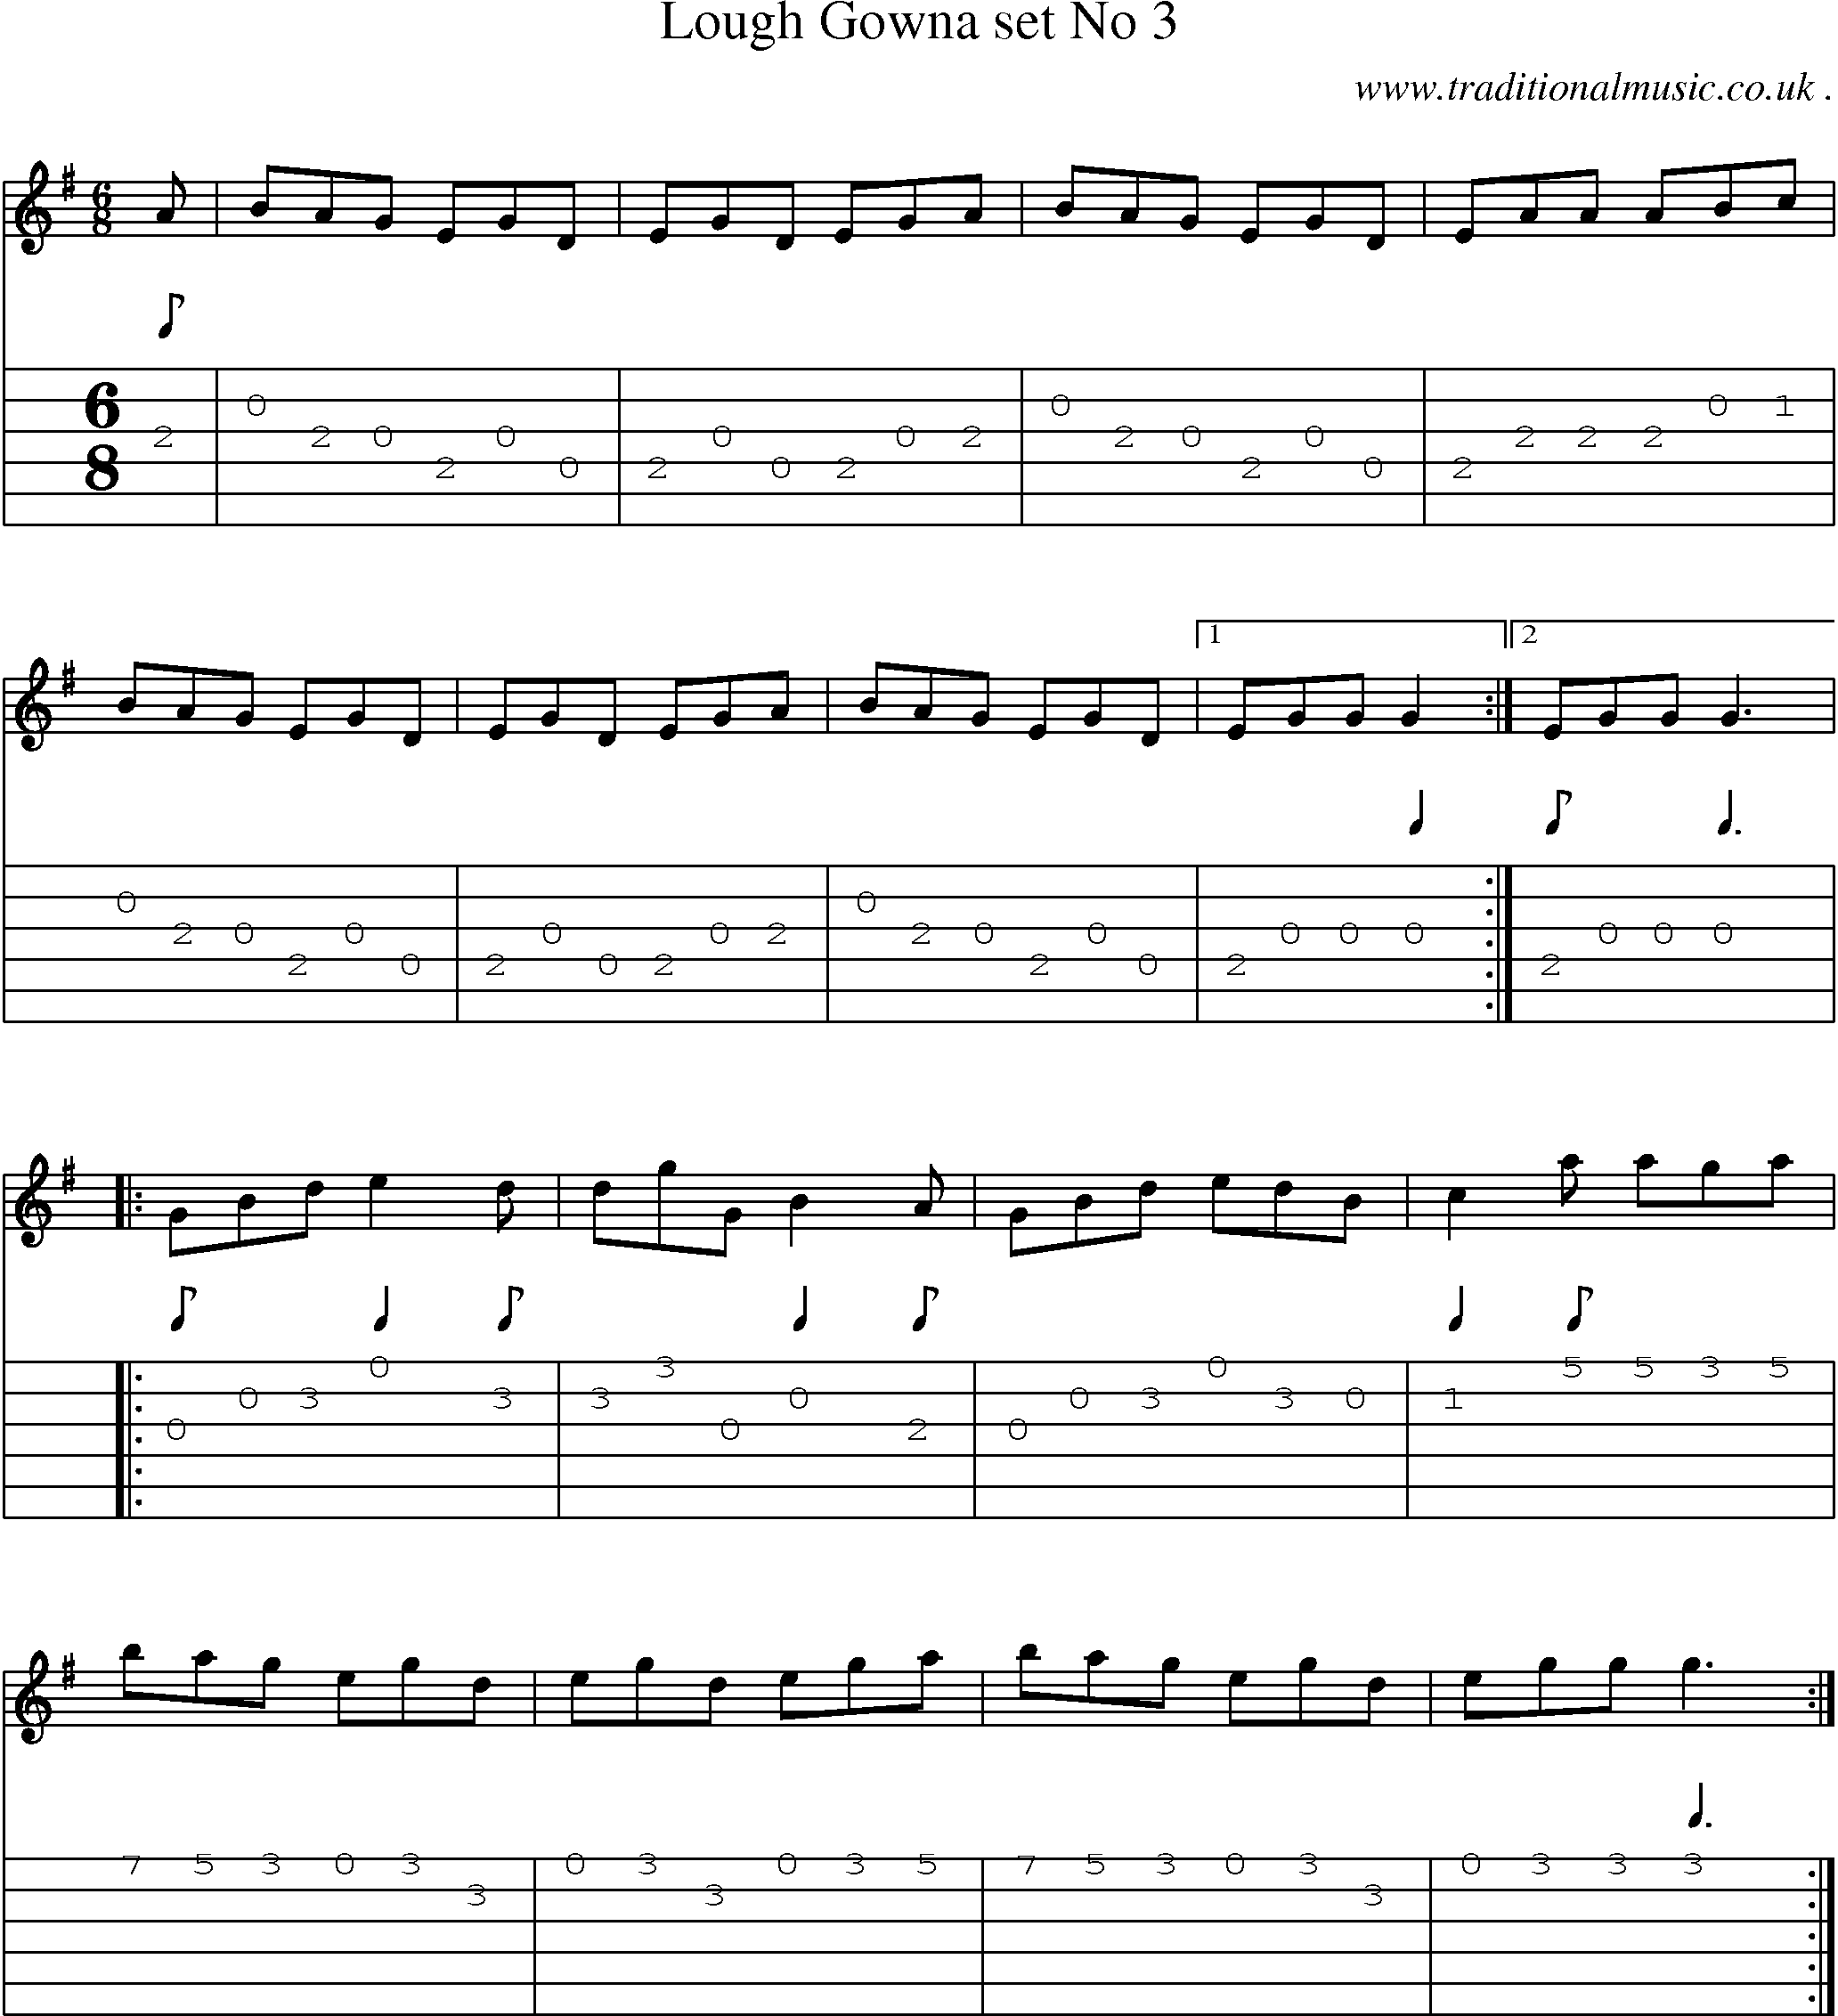 Sheet-Music and Guitar Tabs for Lough Gowna Set No 3